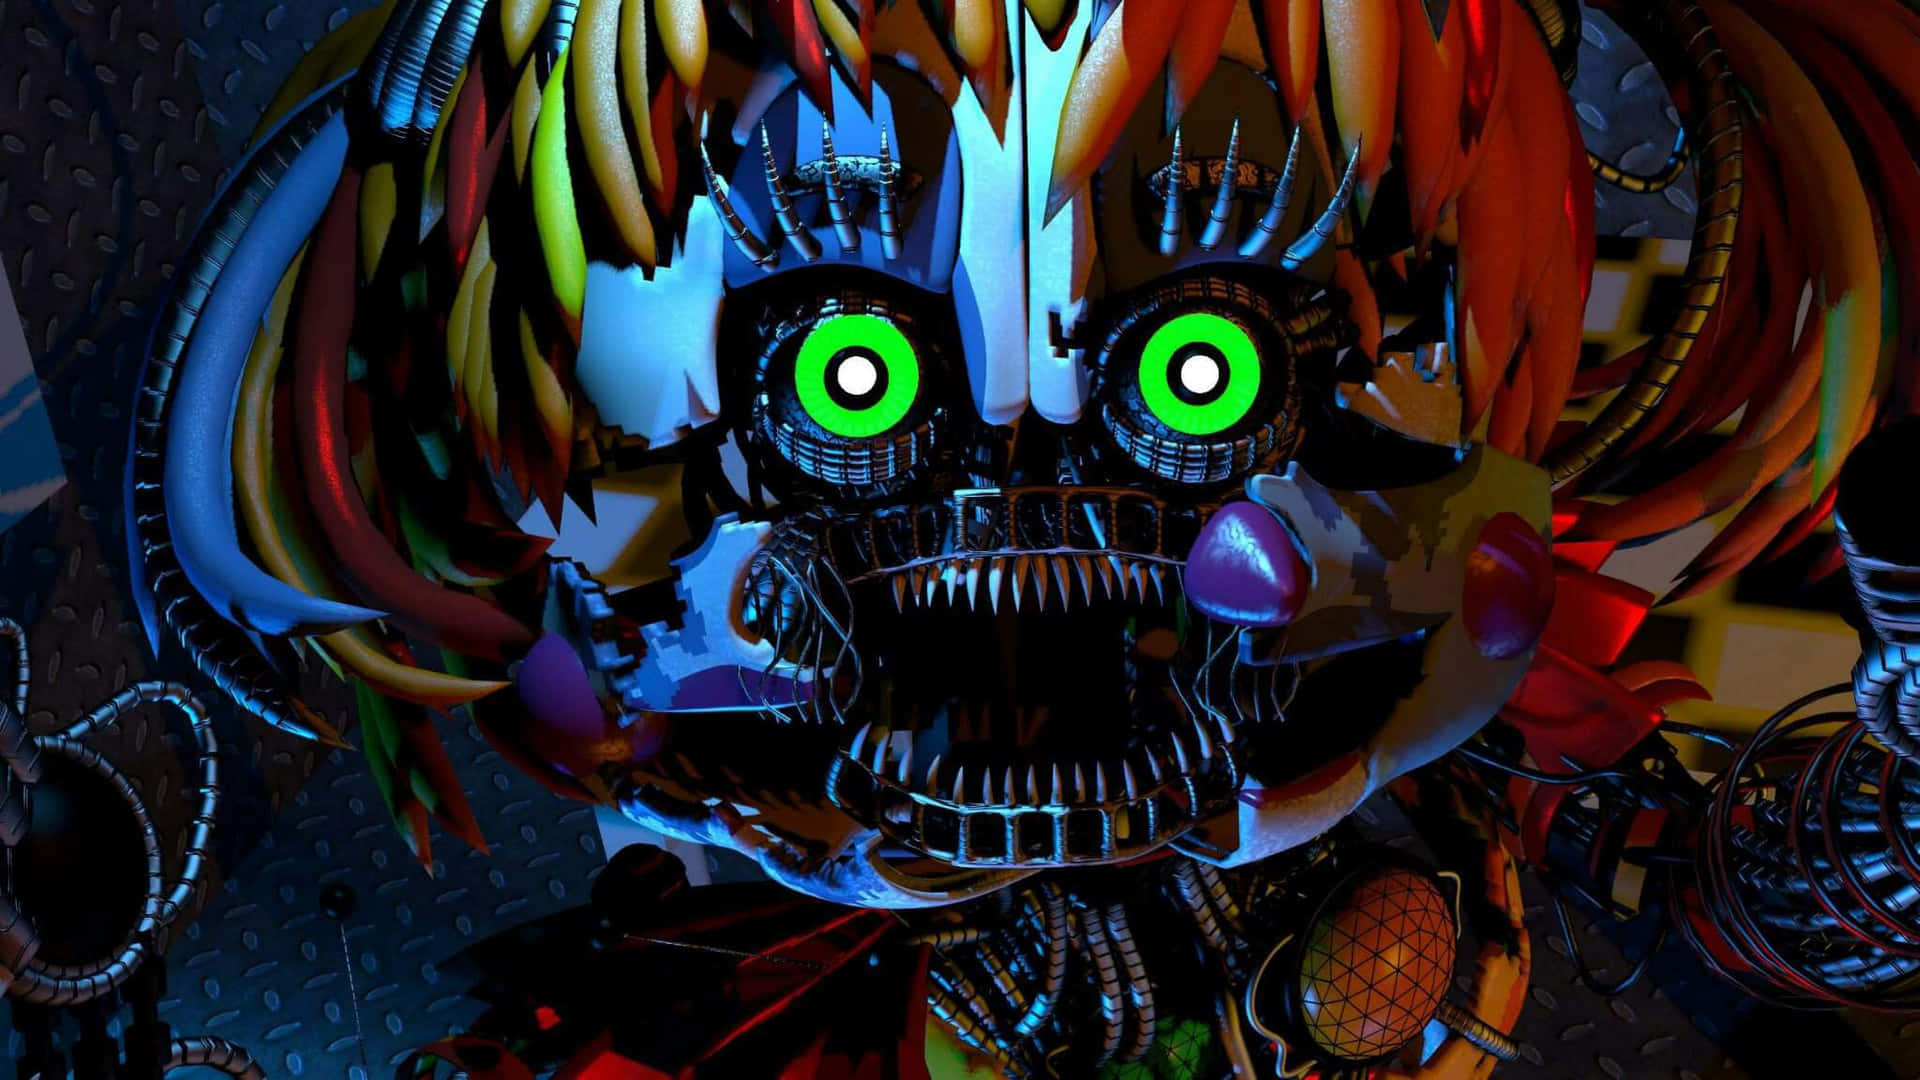 Scrap Baby from Five Nights at Freddy's 6 (FNAF 6) Wallpaper